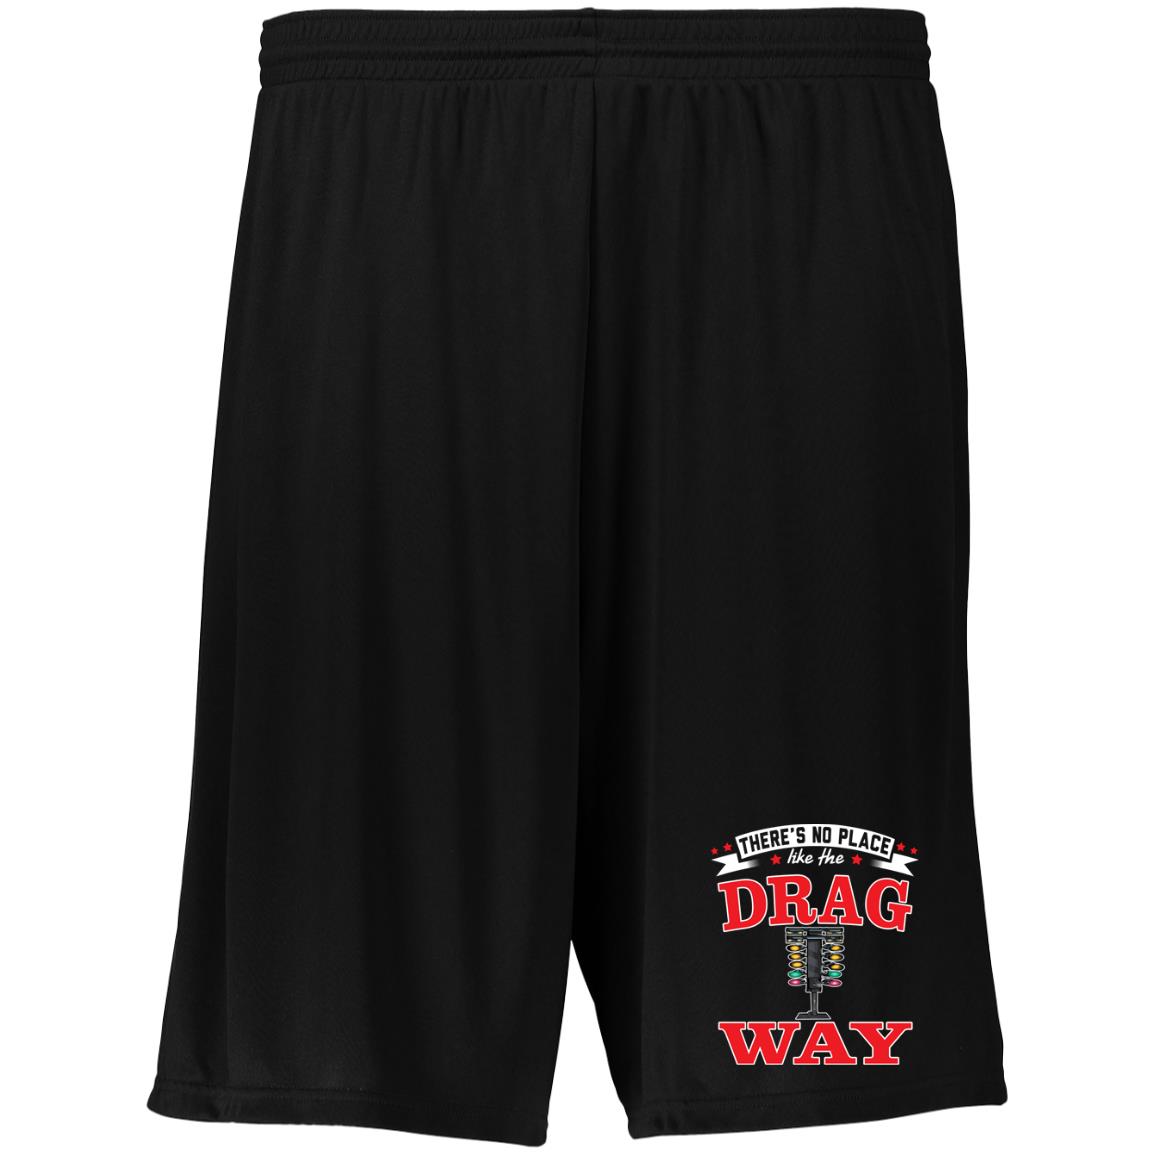 There's No Place Like The Dragway Moisture-Wicking 9 inch Inseam Training Shorts